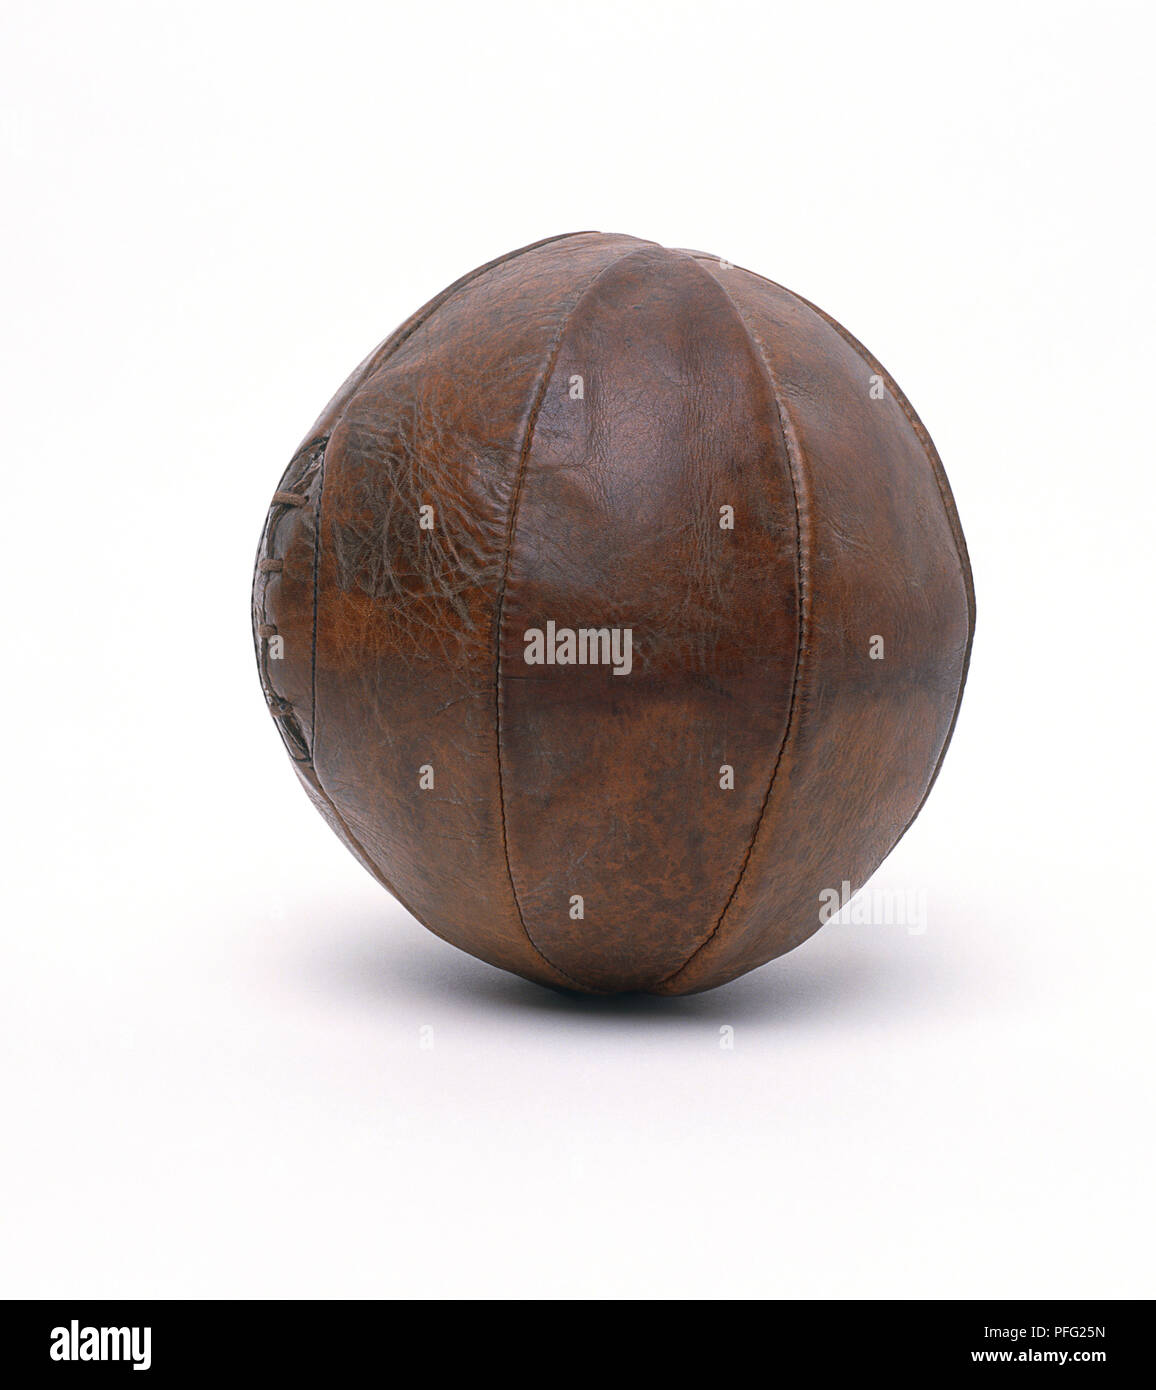 Old-fashioned brown leather football Stock Photo